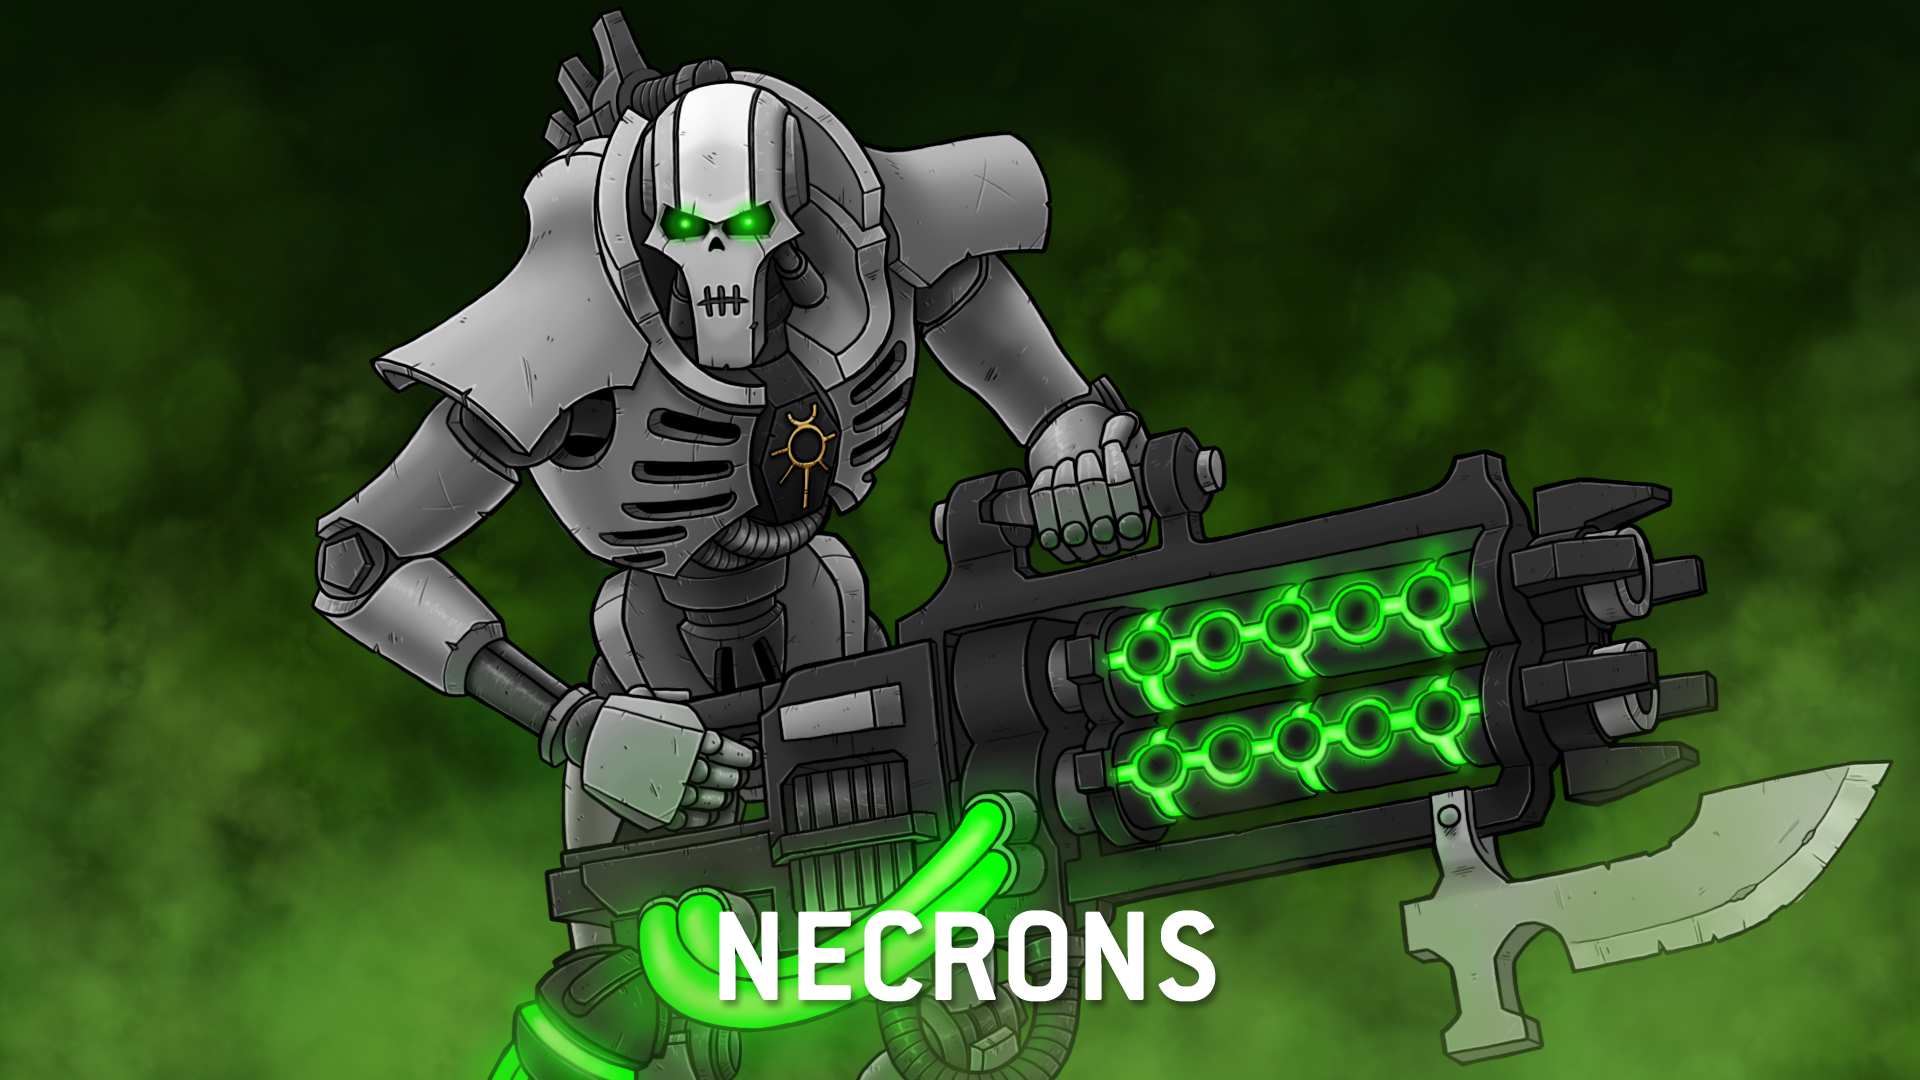 Are there any good books with Necrons as either the main bads or